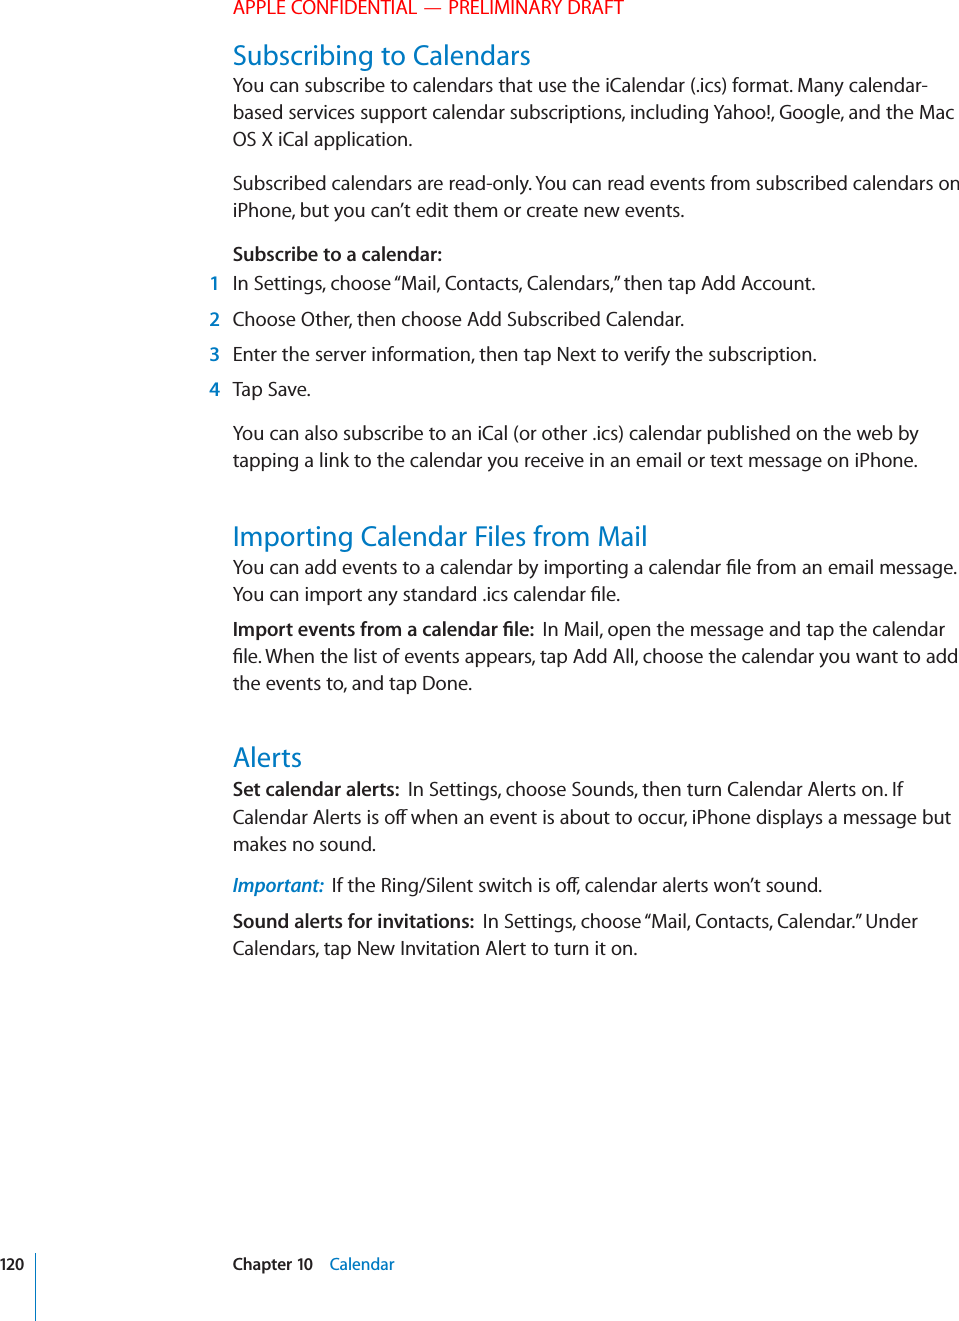 APPLE CONFIDENTIAL — PRELIMINARY DRAFTSubscribing to CalendarsYou can subscribe to calendars that use the iCalendar (.ics) format. Many calendar-based services support calendar subscriptions, including Yahoo!, Google, and the Mac OS X iCal application.Subscribed calendars are read-only. You can read events from subscribed calendars on iPhone, but you can’t edit them or create new events.Subscribe to a calendar:   1  In Settings, choose “Mail, Contacts, Calendars,” then tap Add Account. 2  Choose Other, then choose Add Subscribed Calendar. 3  Enter the server information, then tap Next to verify the subscription. 4 Tap Save.You can also subscribe to an iCal (or other .ics) calendar published on the web by tapping a link to the calendar you receive in an email or text message on iPhone.Importing Calendar Files from Mail-0/24%6%.43&amp;2/-!#!,%.$!2=,%In Mail, open the message and tap the calendar the events to, and tap Done.AlertsSet calendar alerts:  In Settings, choose Sounds, then turn Calendar Alerts on. If makes no sound.Important:  Sound alerts for invitations:  In Settings, choose “Mail, Contacts, Calendar.” Under Calendars, tap New Invitation Alert to turn it on.120 Chapter 10    Calendar